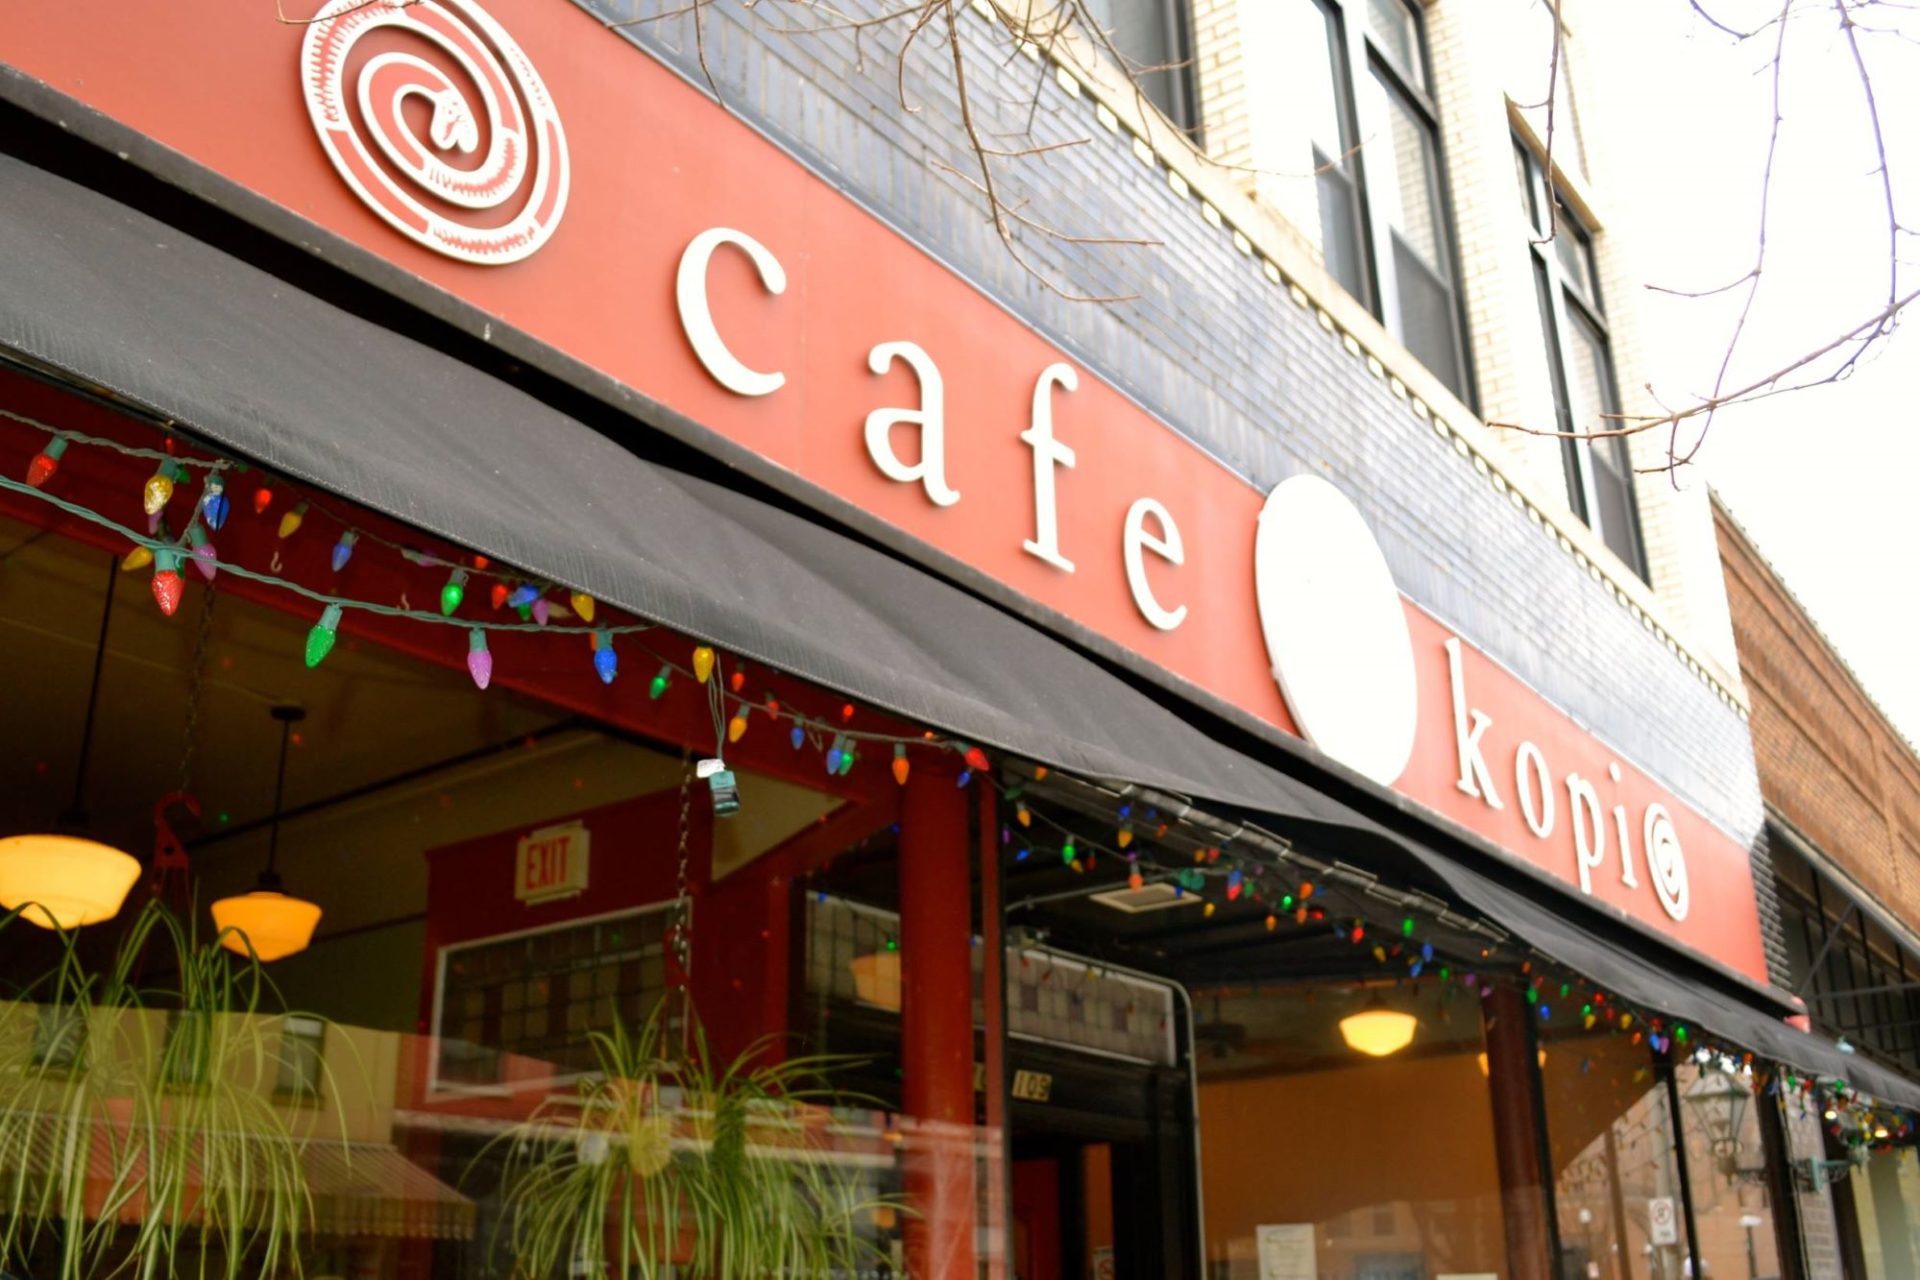 The front of Cafe Kopi, focused on the red sign with white letters.